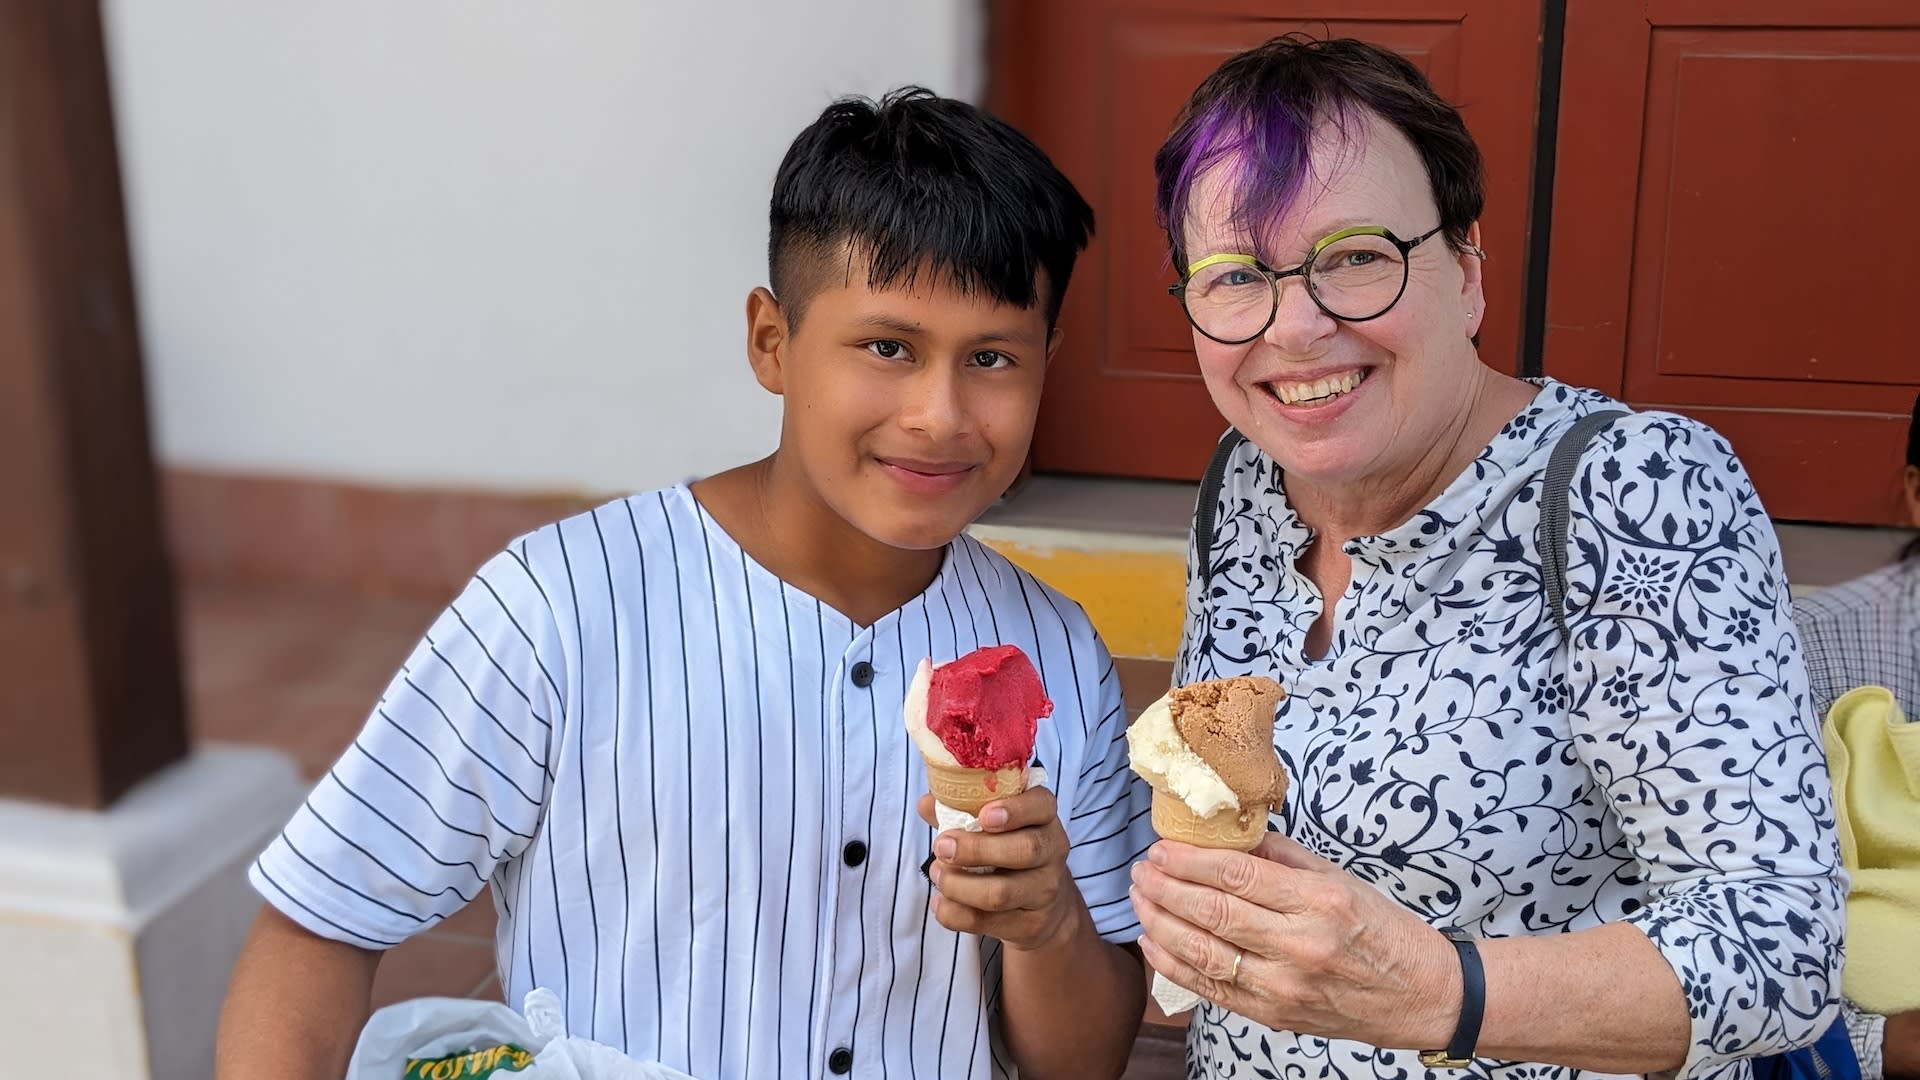 Lynn is wearing glasses and a floral shirt. She holds an ice cream cone. Roberto is wearing a striped shirt and holding an ice cream cone.